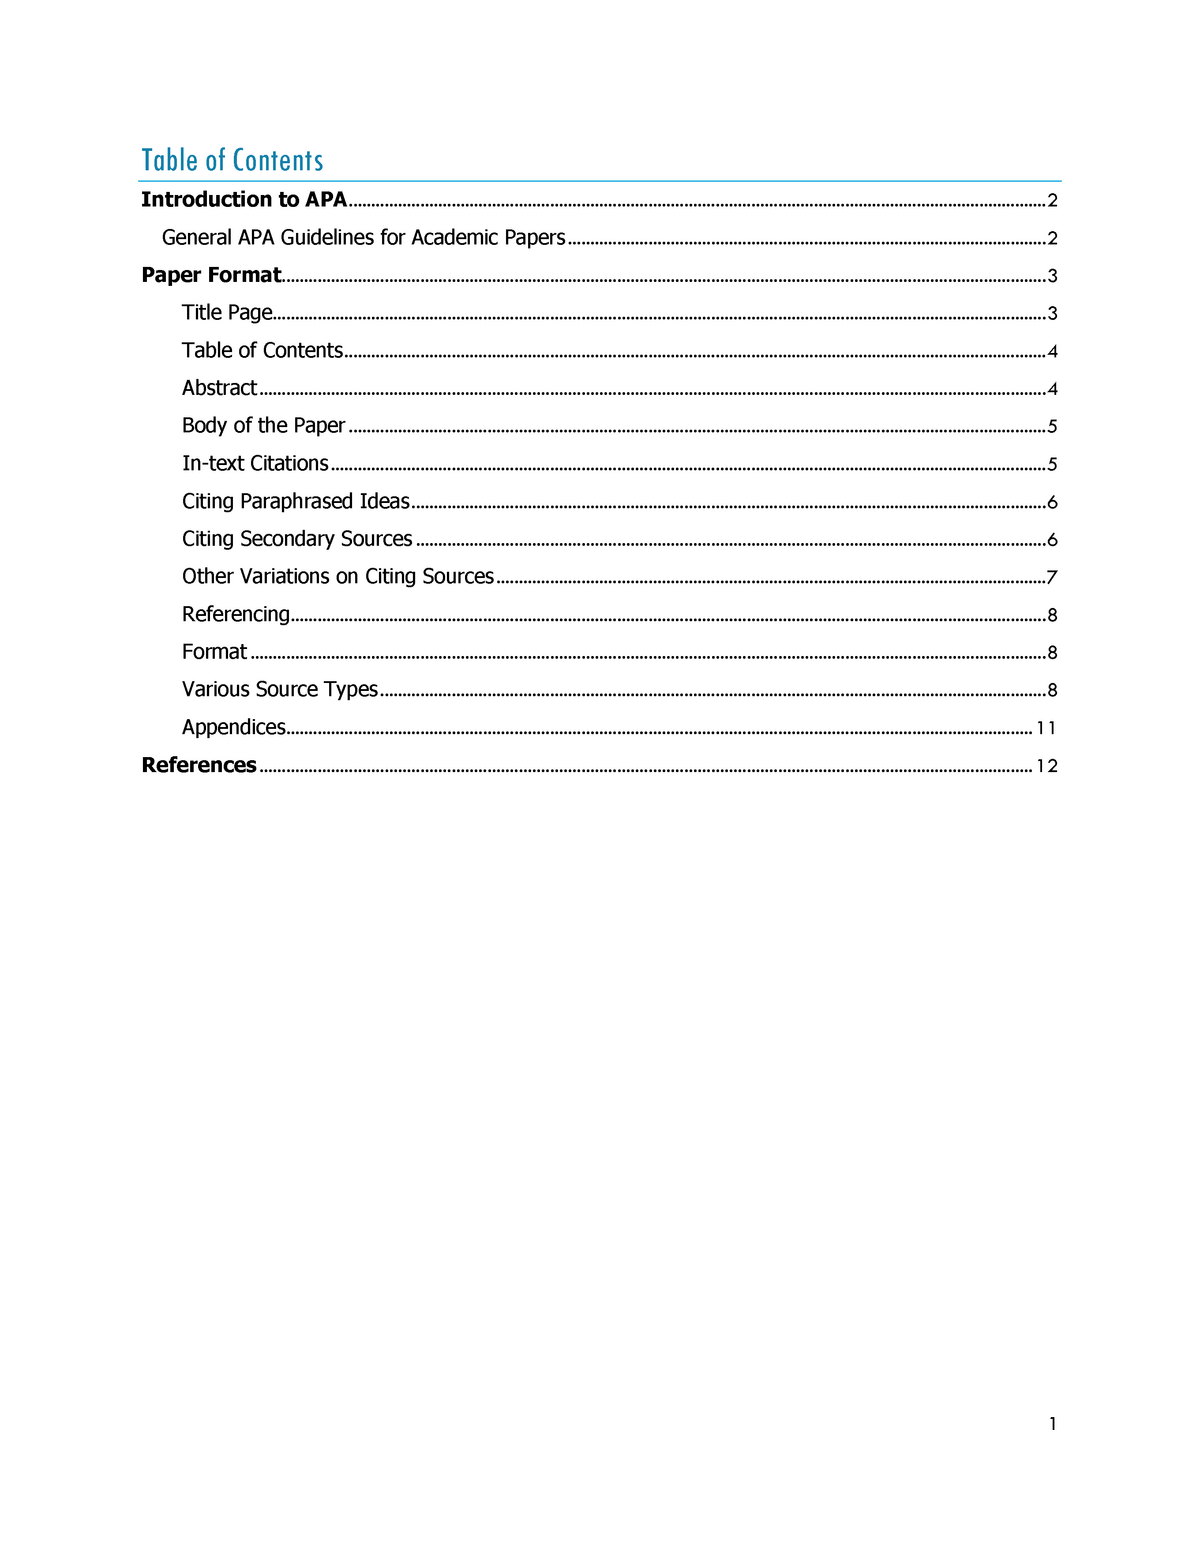 APA Writing Guide 2020 - APA format - Table of Contents Introduction to